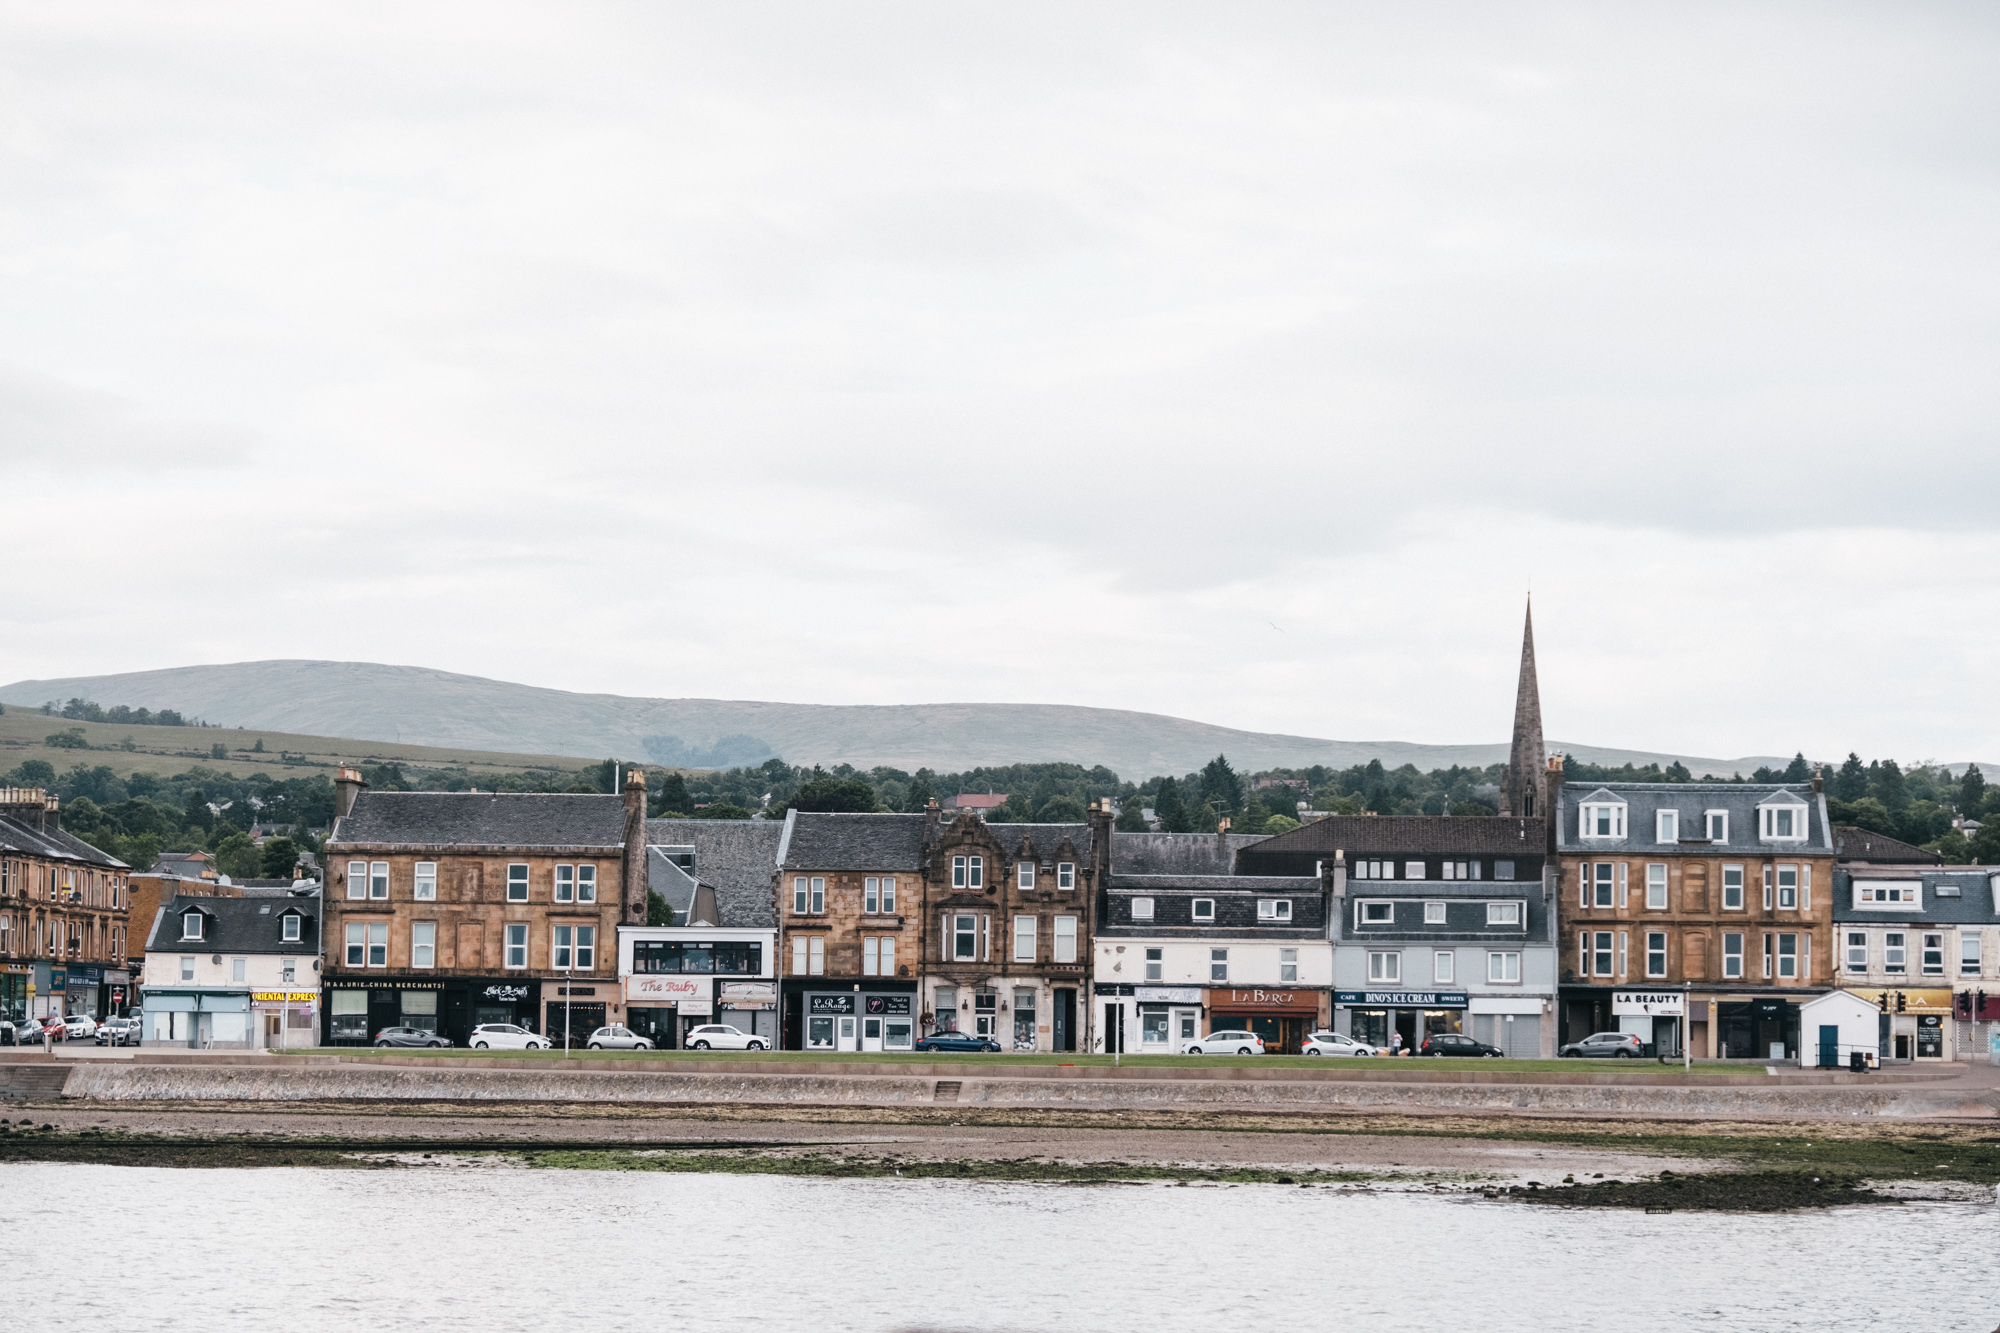 Helensburgh is only 45 min from Glasgow by a direct train